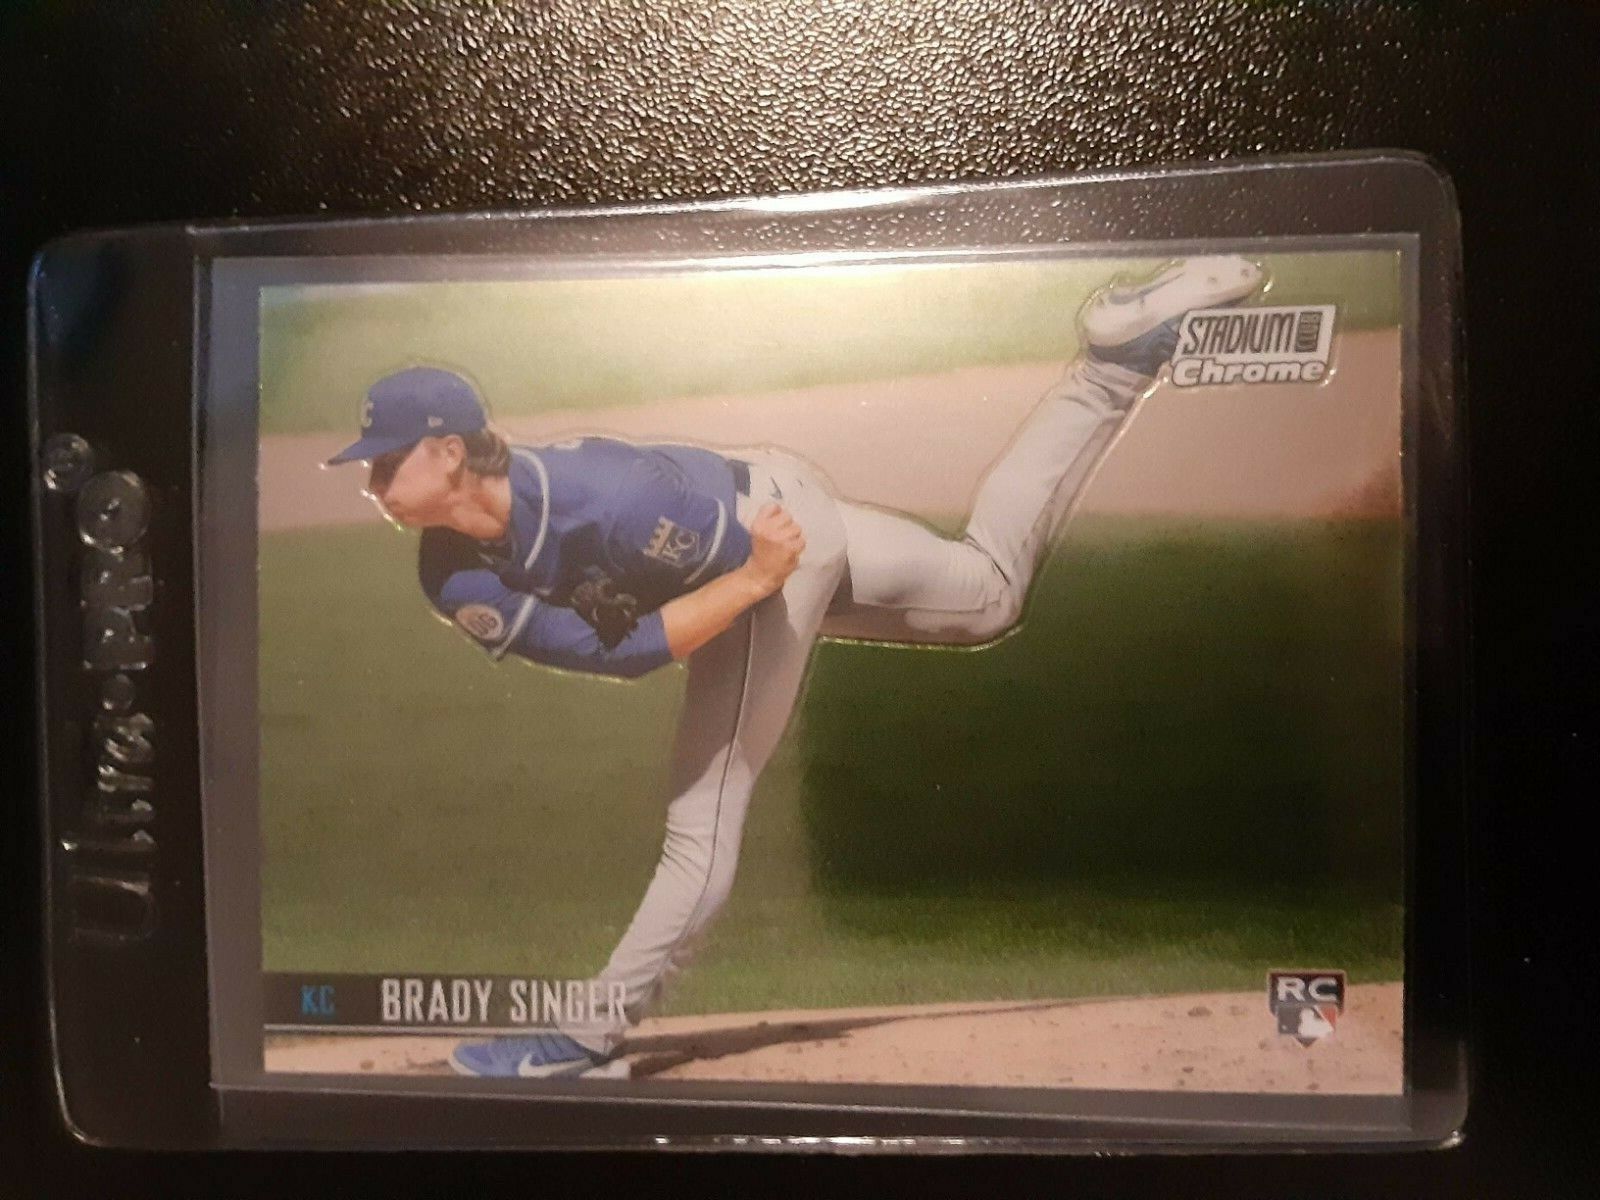 2021 Topps Stadium Club Chrome Rookie Card RC #216 - Brady Singer - Royals. rookie card picture